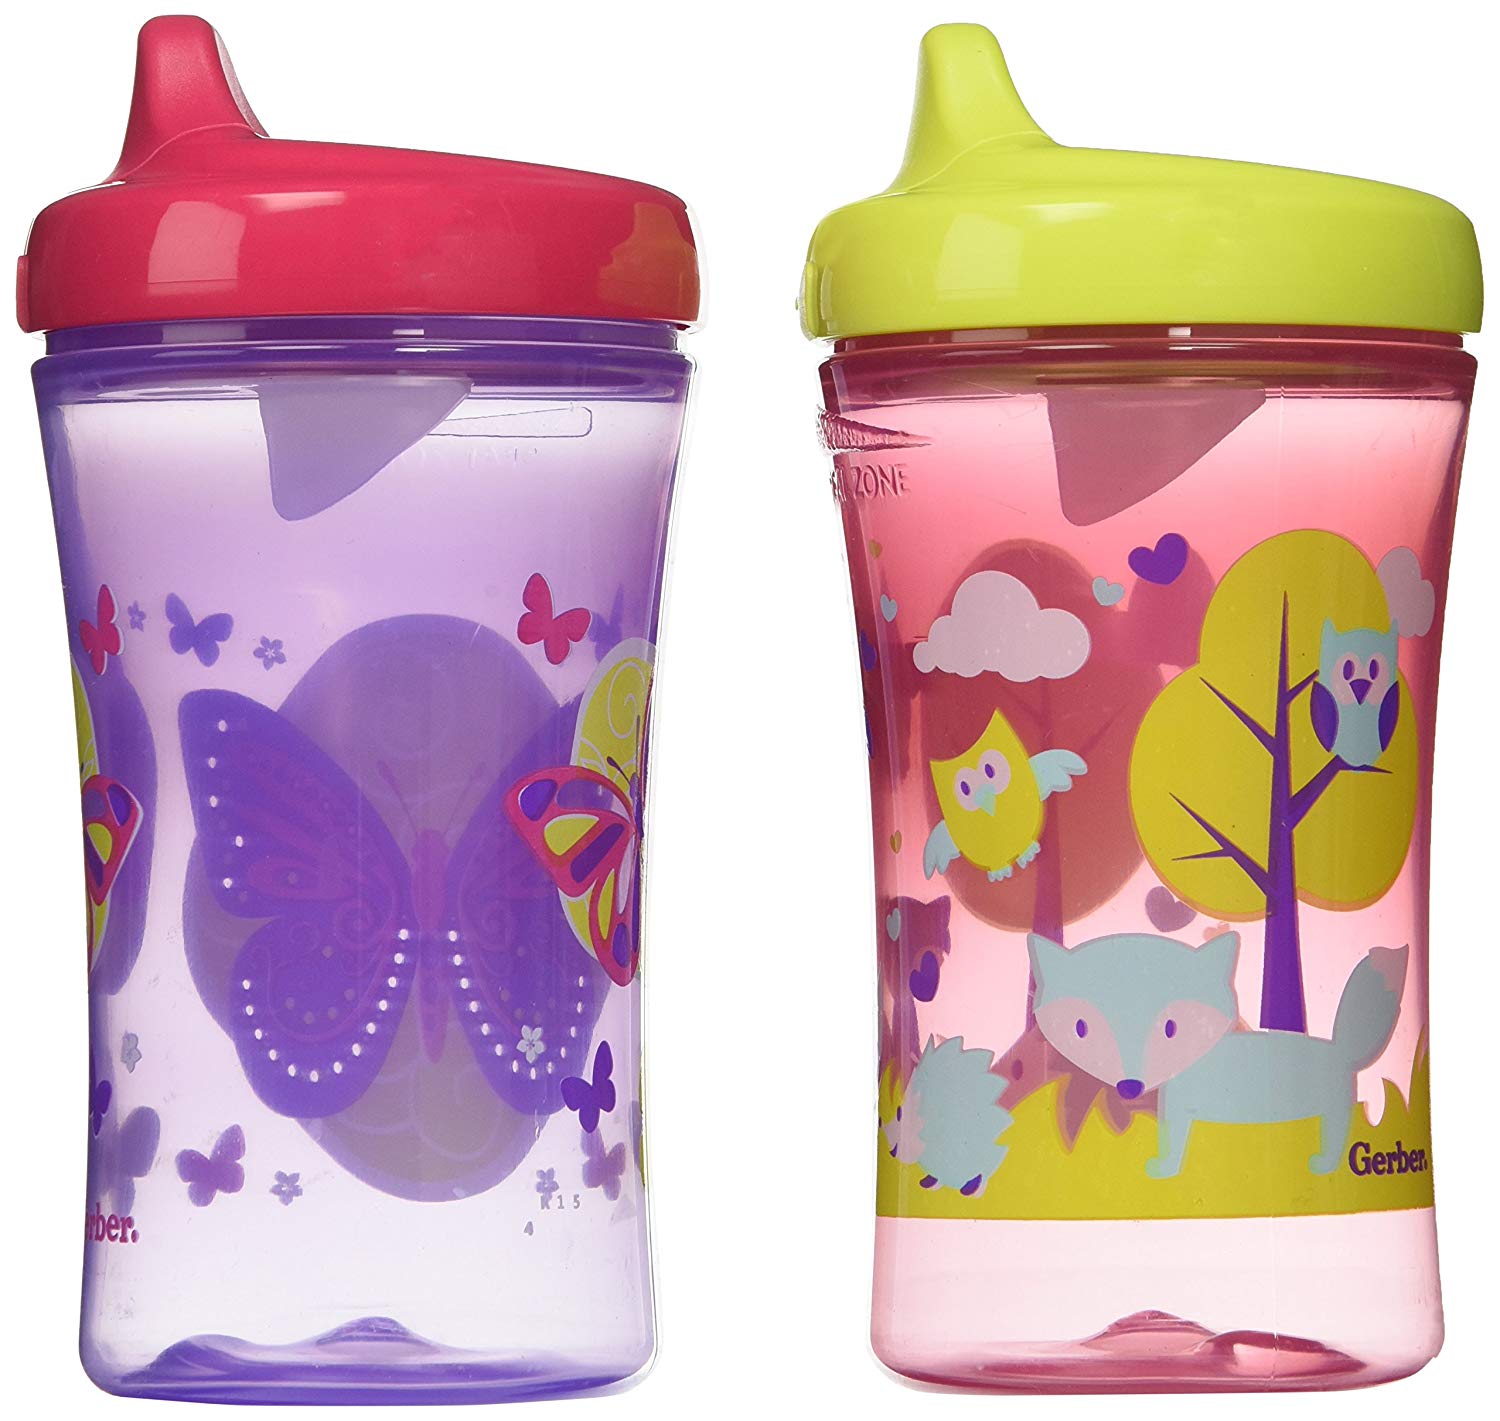 Nuk First Essentials Hard Spout Sippy Cup 2 Pack, 10-Ounce $5.38 (REG $13.79)